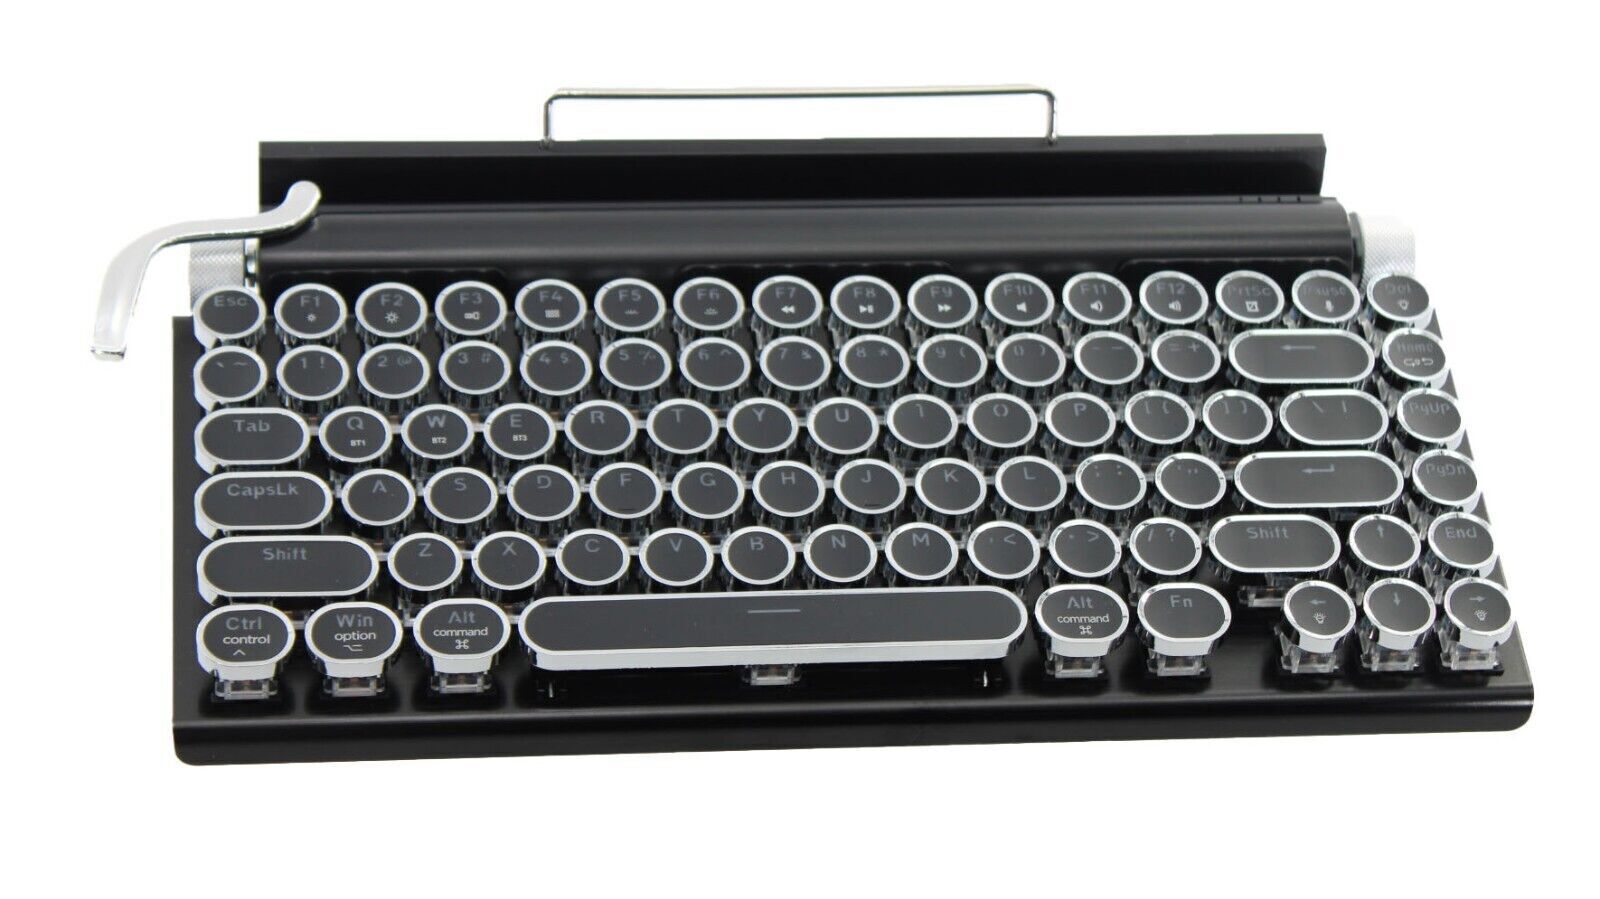 7KEYS Electric Typewriter Vintage with Upgraded Mechanical Bluetooth 5.0